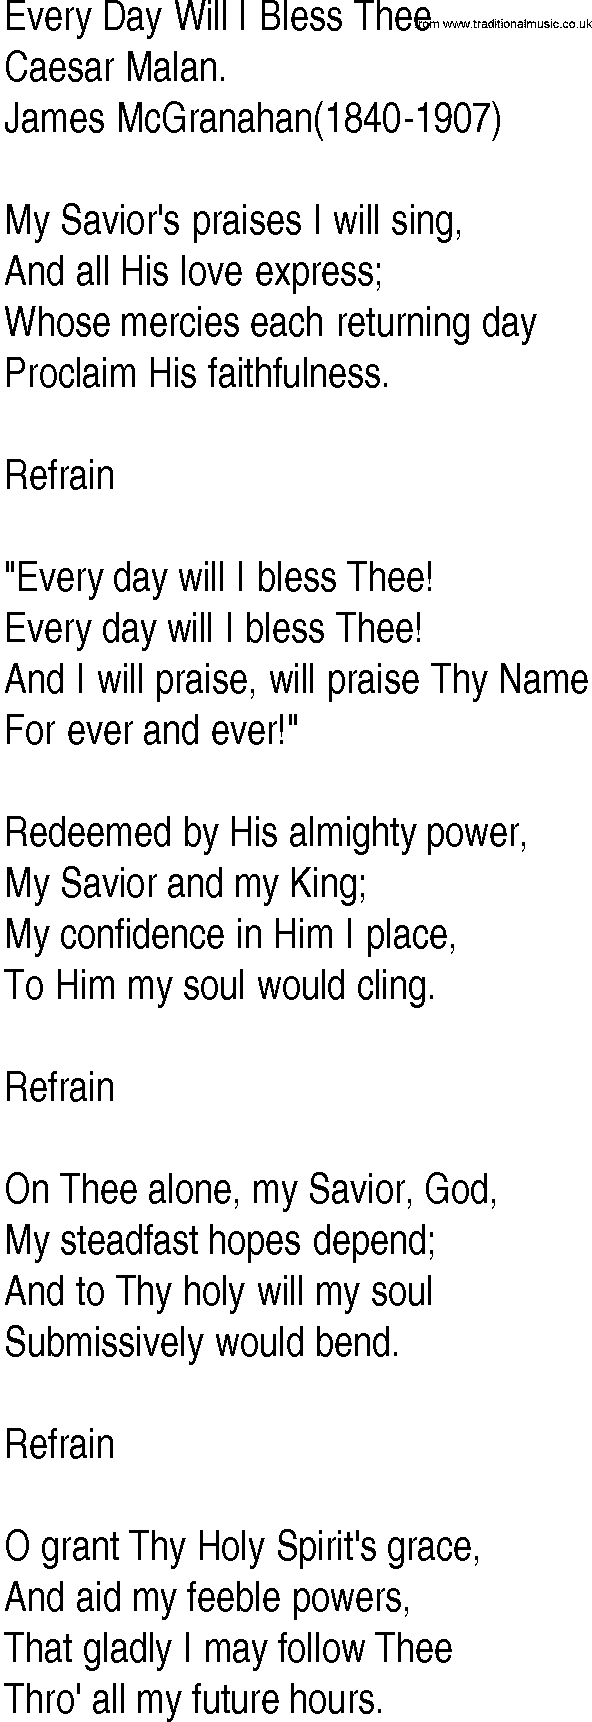 Hymn and Gospel Song: Every Day Will I Bless Thee by Caesar Malan lyrics